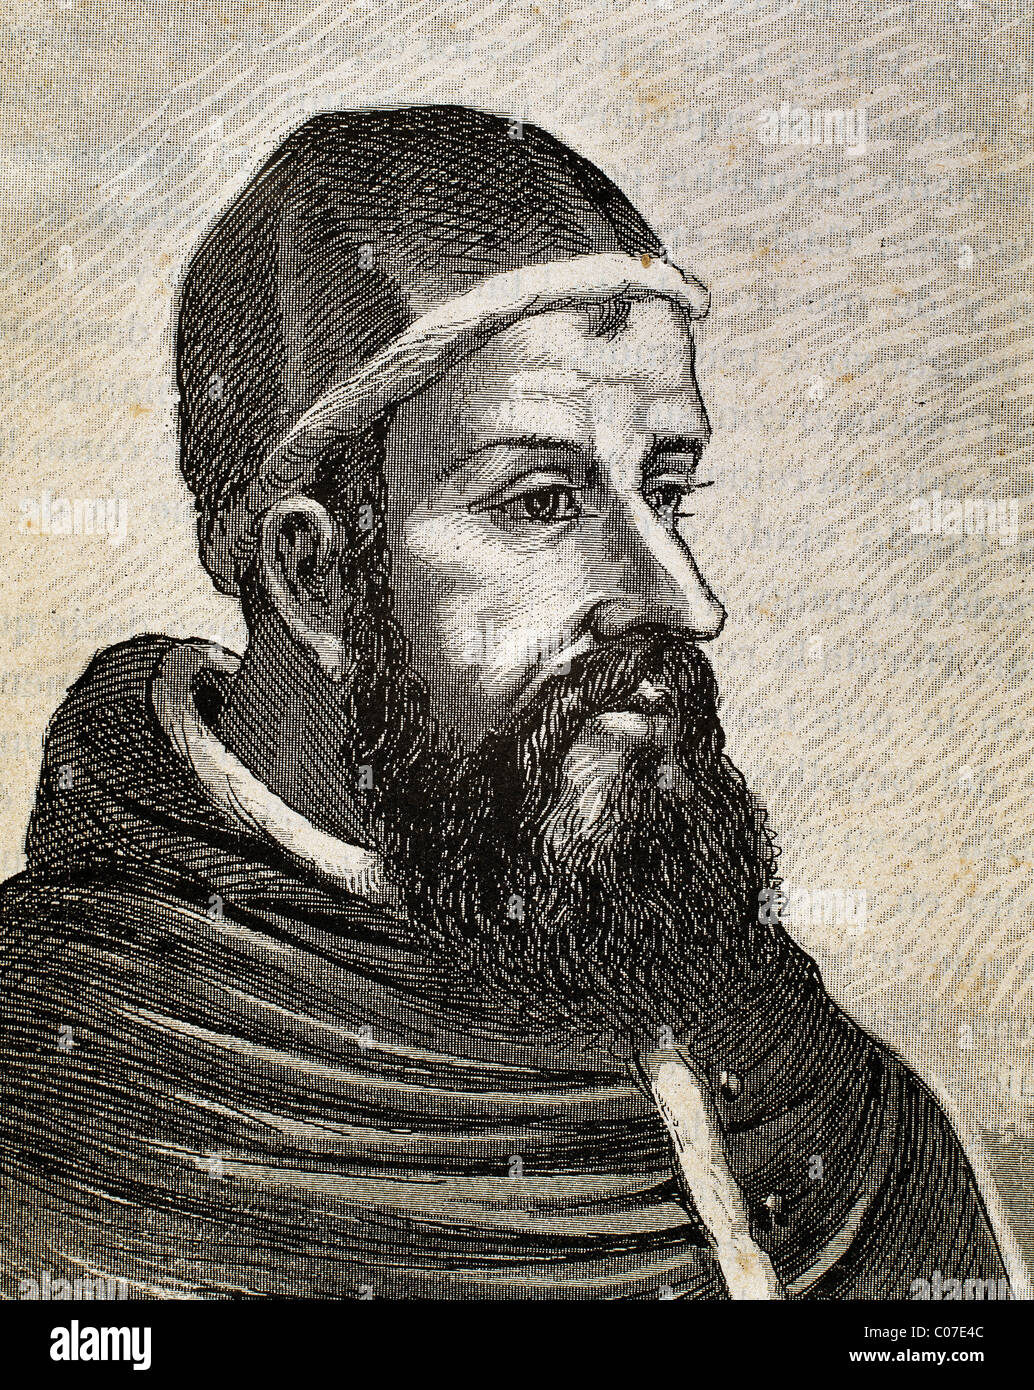 Clement VII (1478–1534), born Giulio di Giuliano de Medici Cardinal from 1513 to 1523 and Pope from 1523 to 1534. Stock Photo